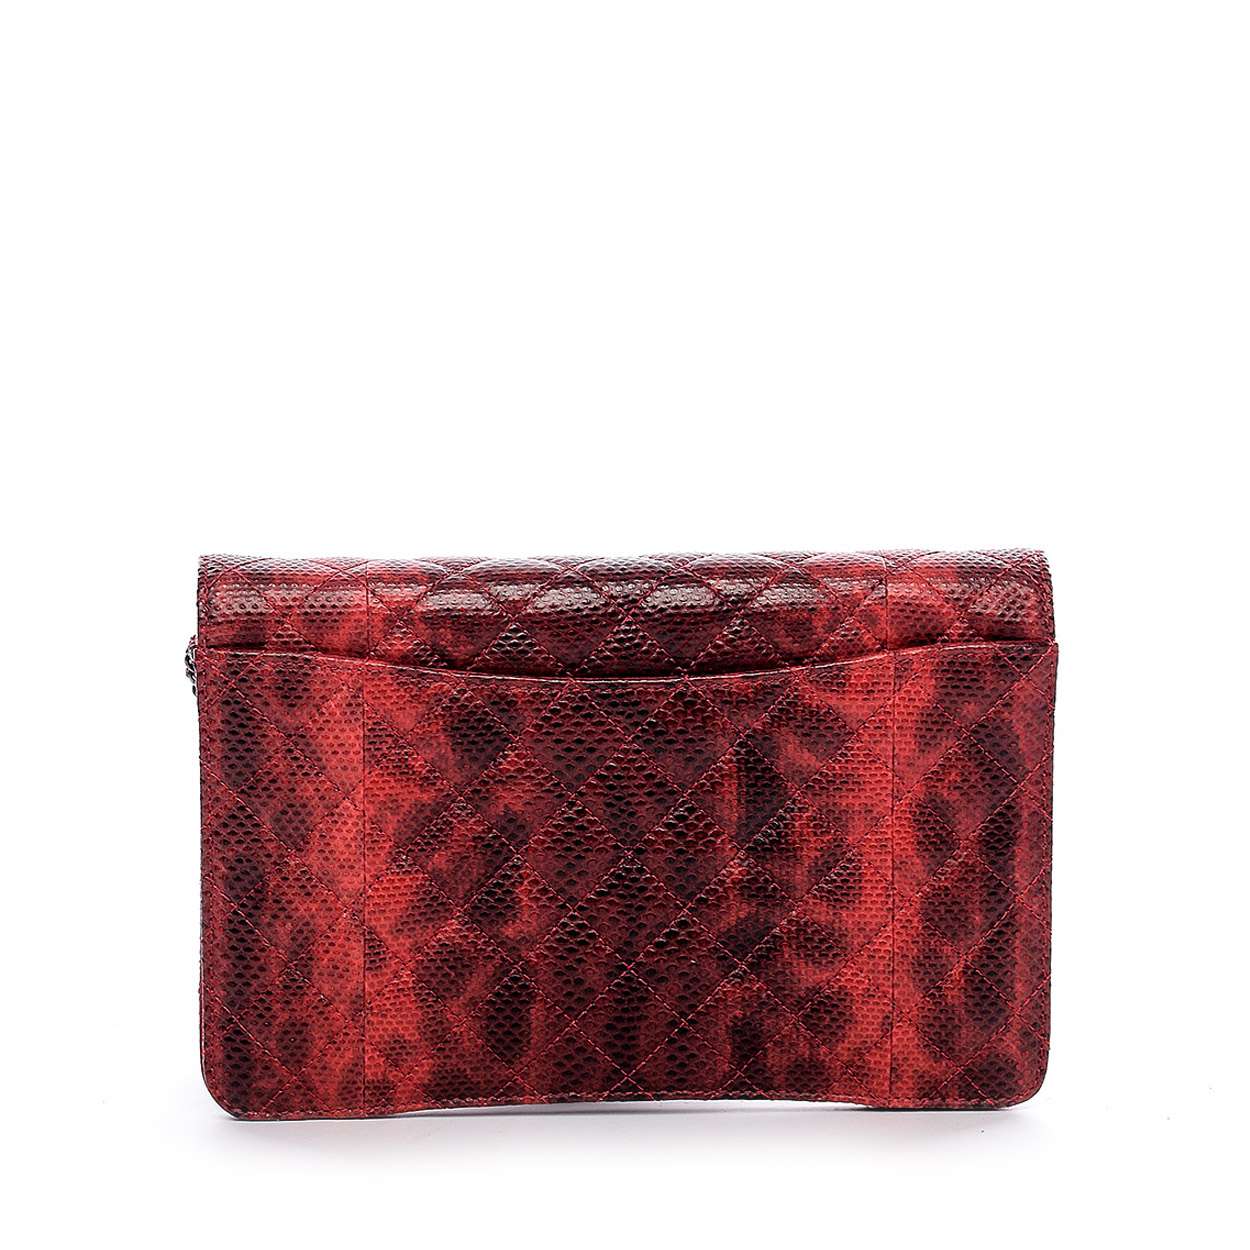 Chanel - Red Quilted Lizard Leather Messenger and Clutch Bag